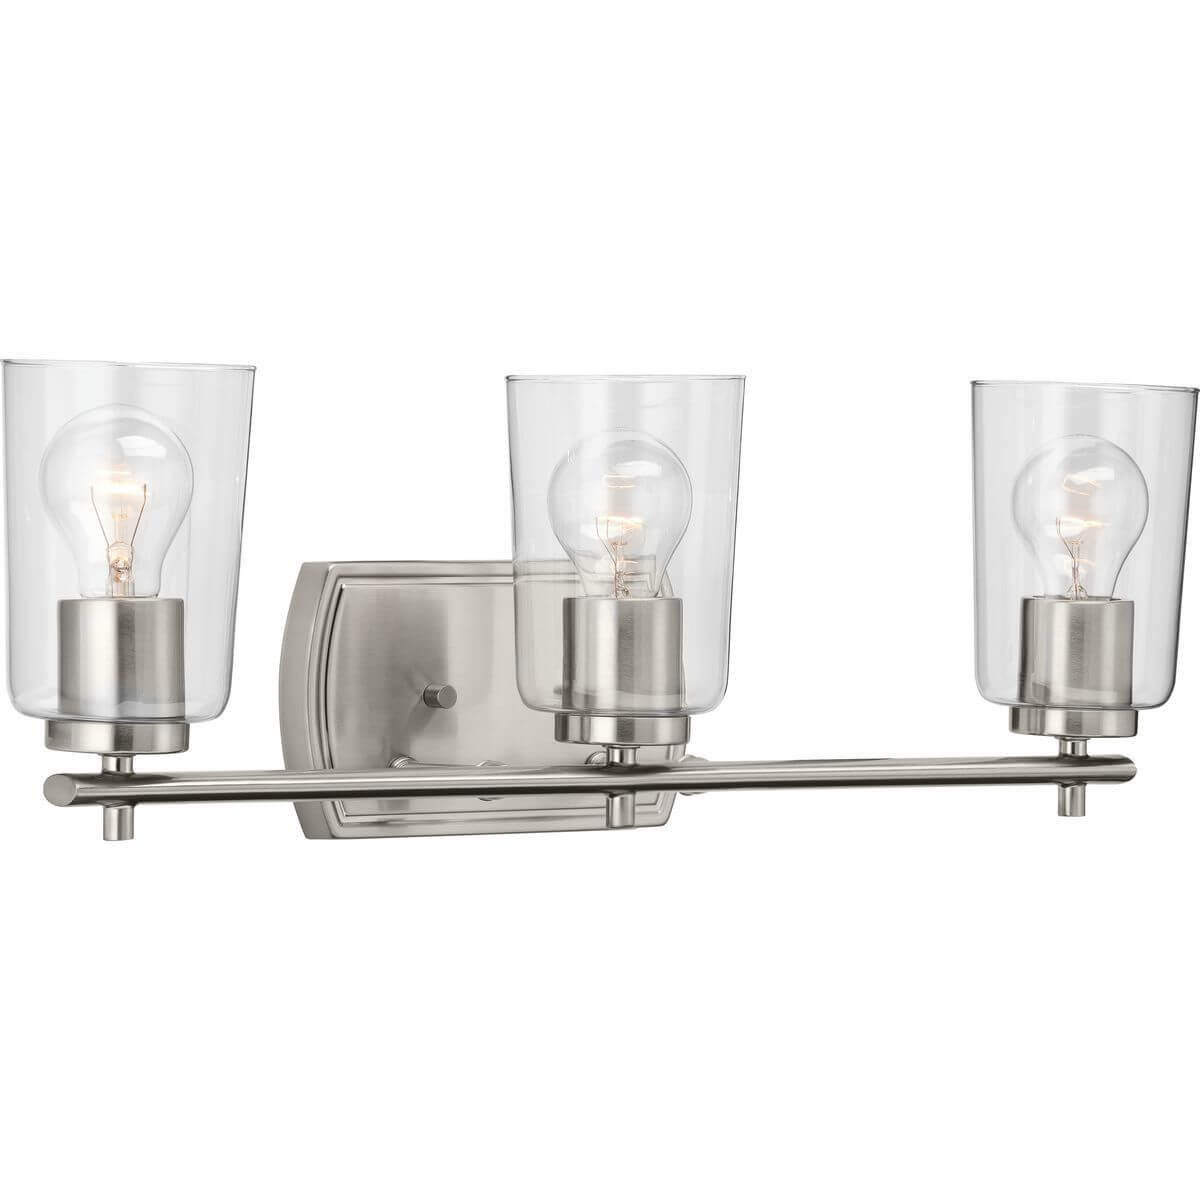 Progress Lighting Adley 3 Light 23 inch Bath Vanity Light in Brushed Nickel with Clear Glass P300156-009